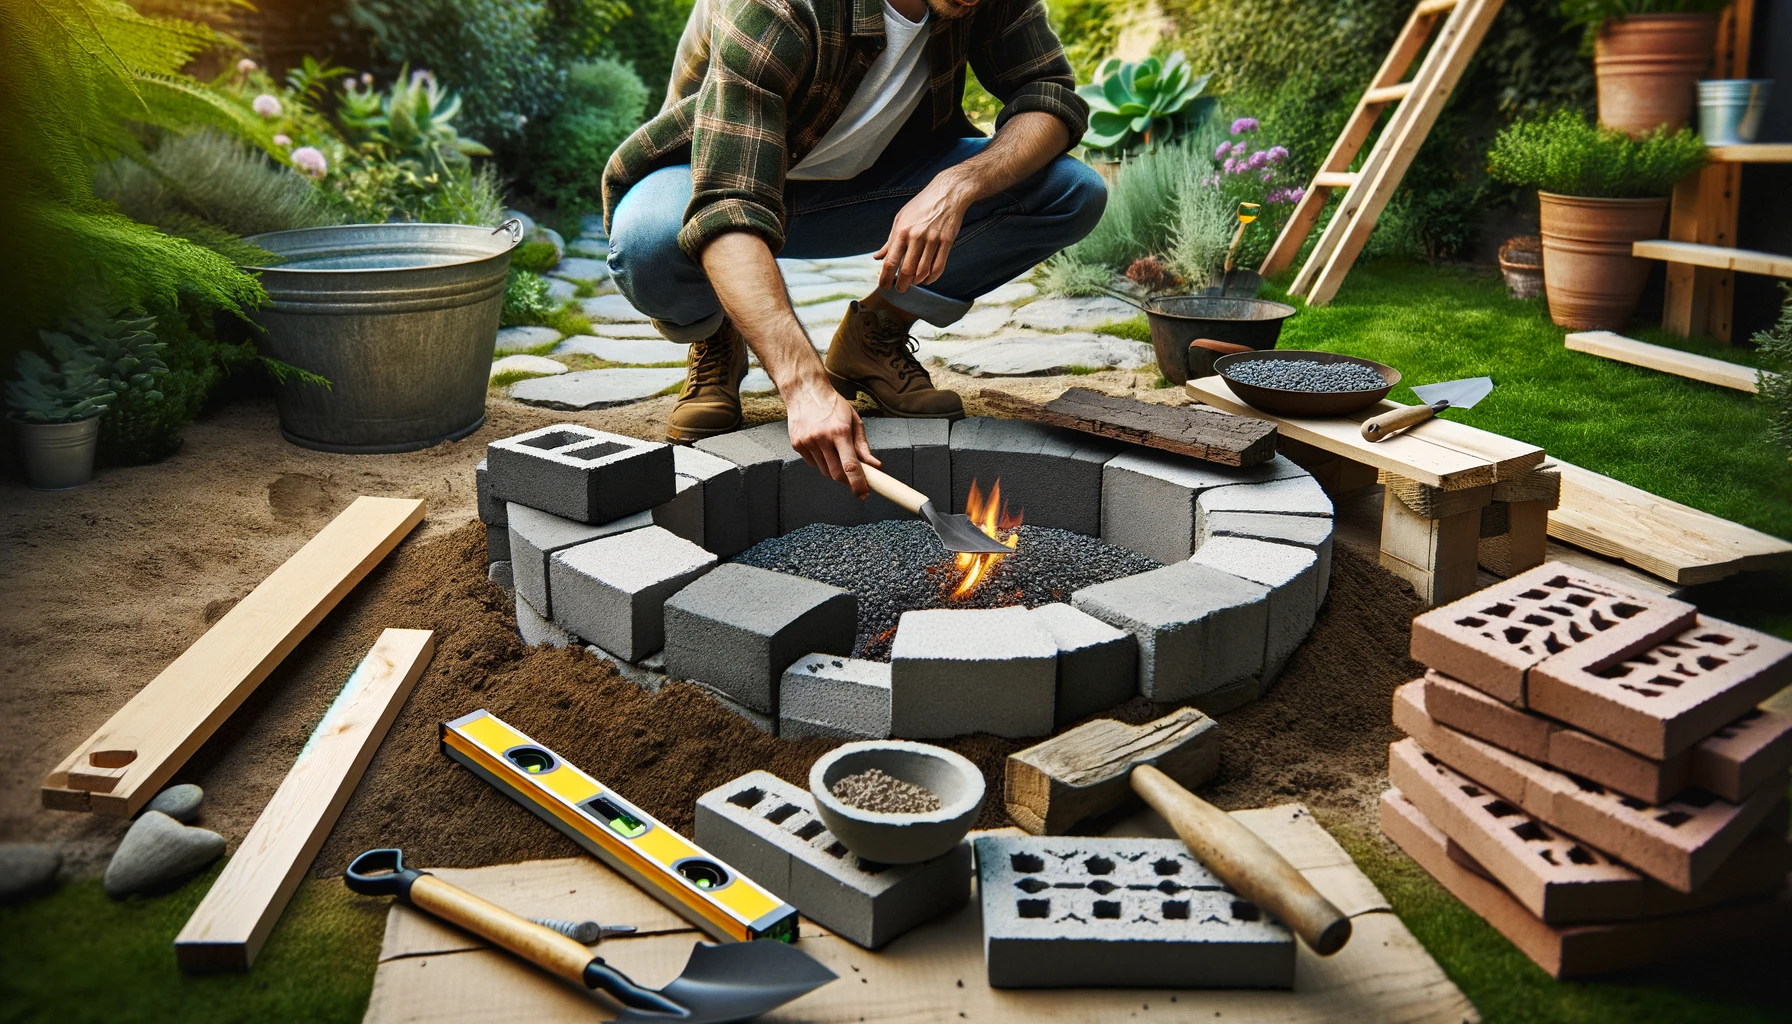 An individual outdoors, constructing a fire pit in their backyard